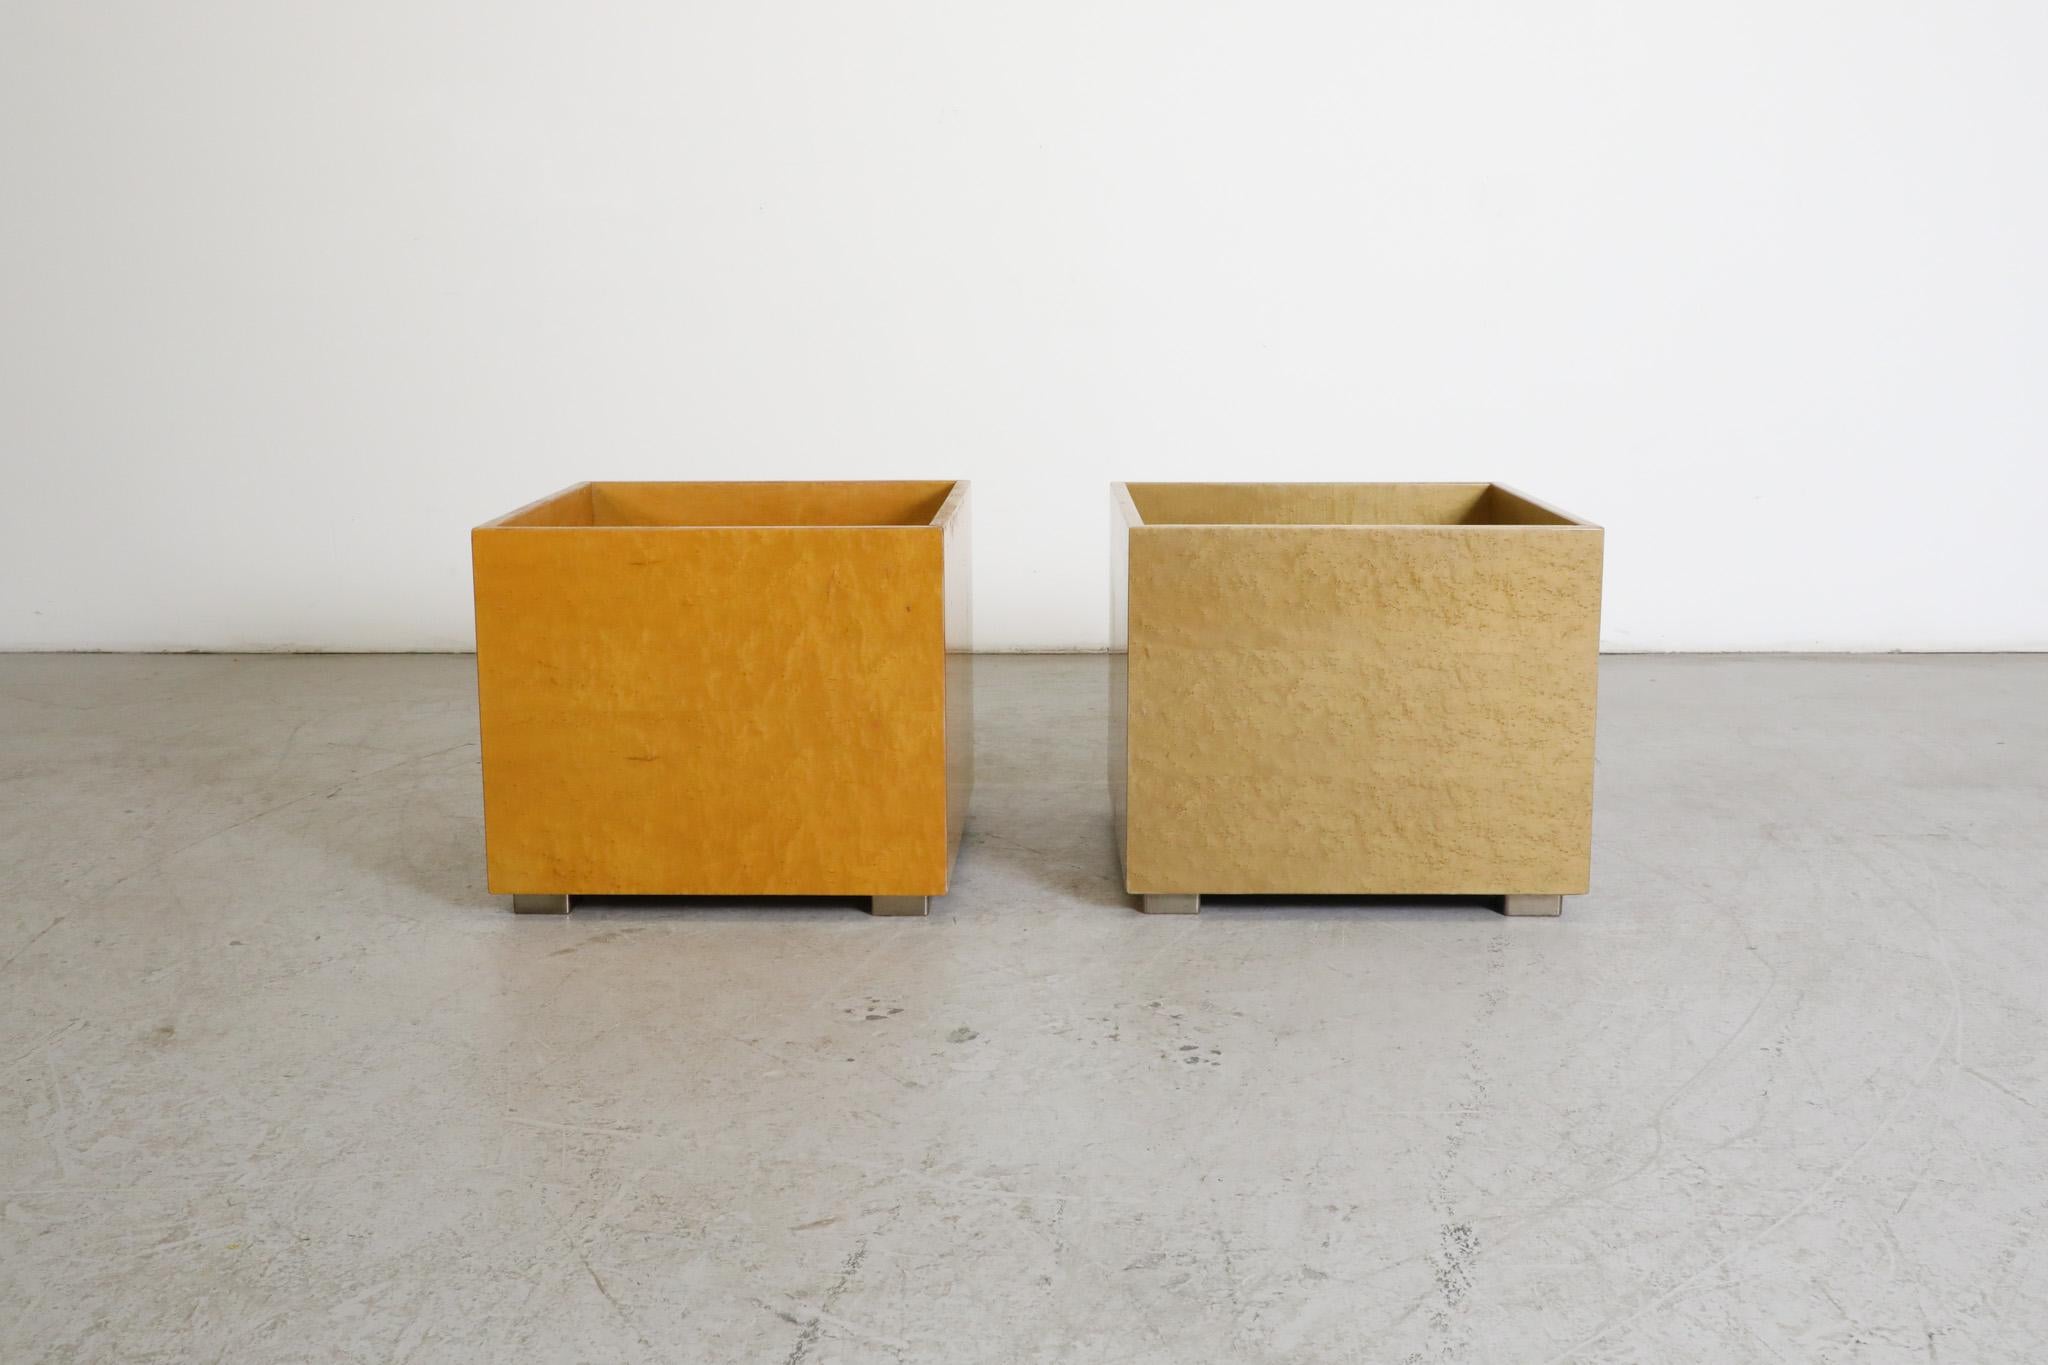 Two square high gloss bird's eye maple planters by prominent Italian furniture and product designer Giovanni Offredi and made by Italian furniture house Saporitii in the 1970s. These planters are stackable for a dramatic effect and have brushed